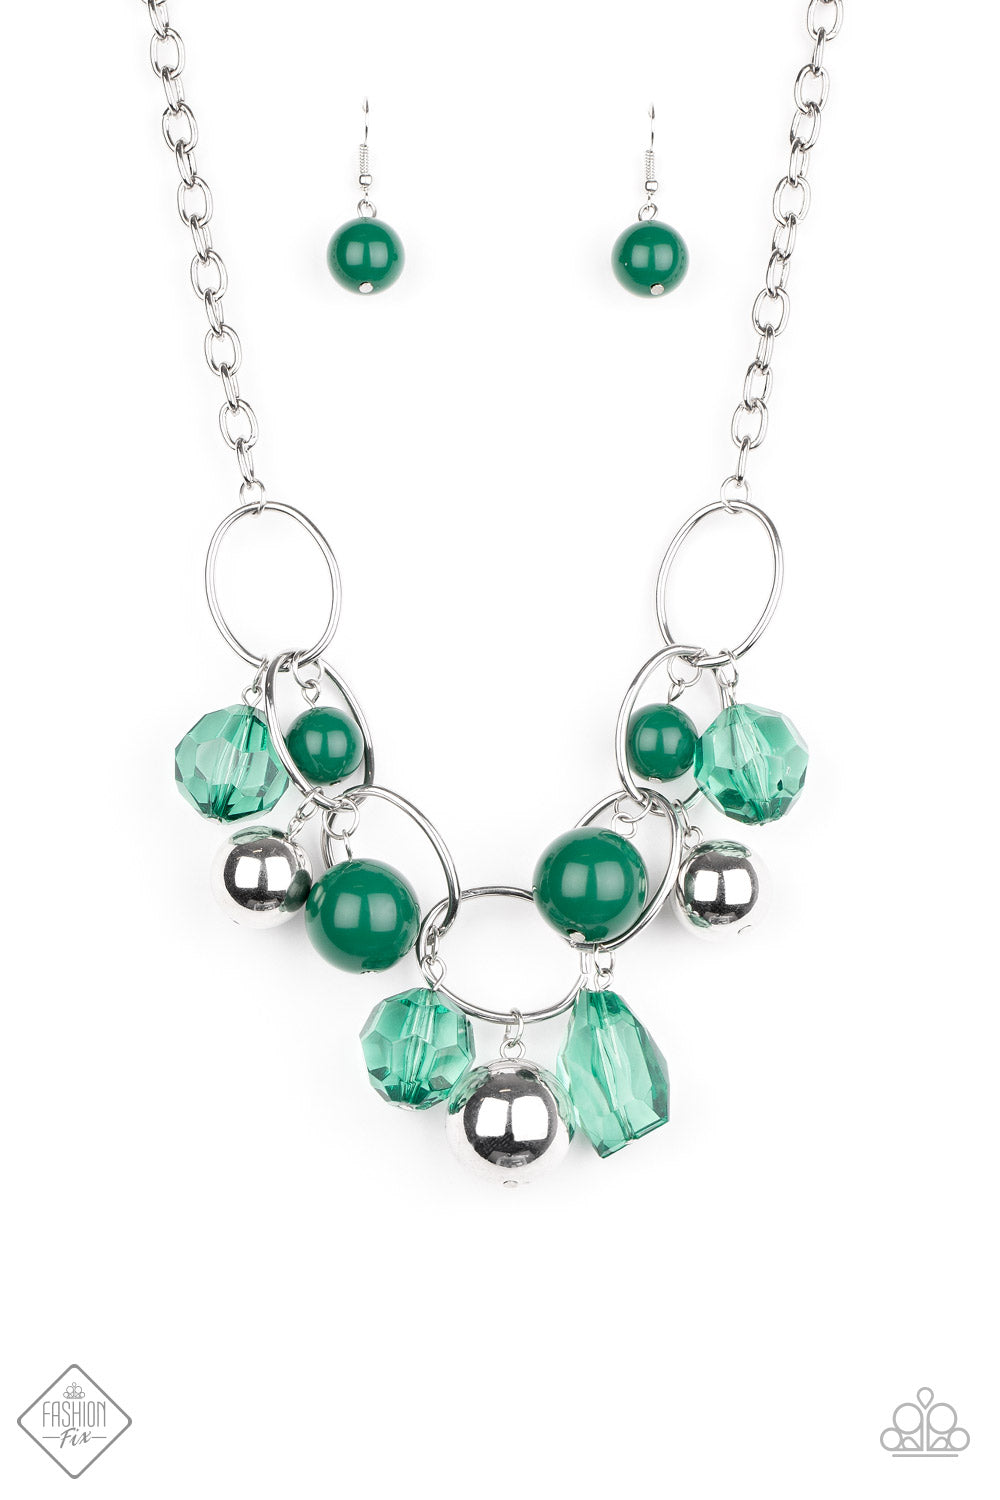 Forever and EVERGLADE - Green Necklace - Paparazzi Accessories